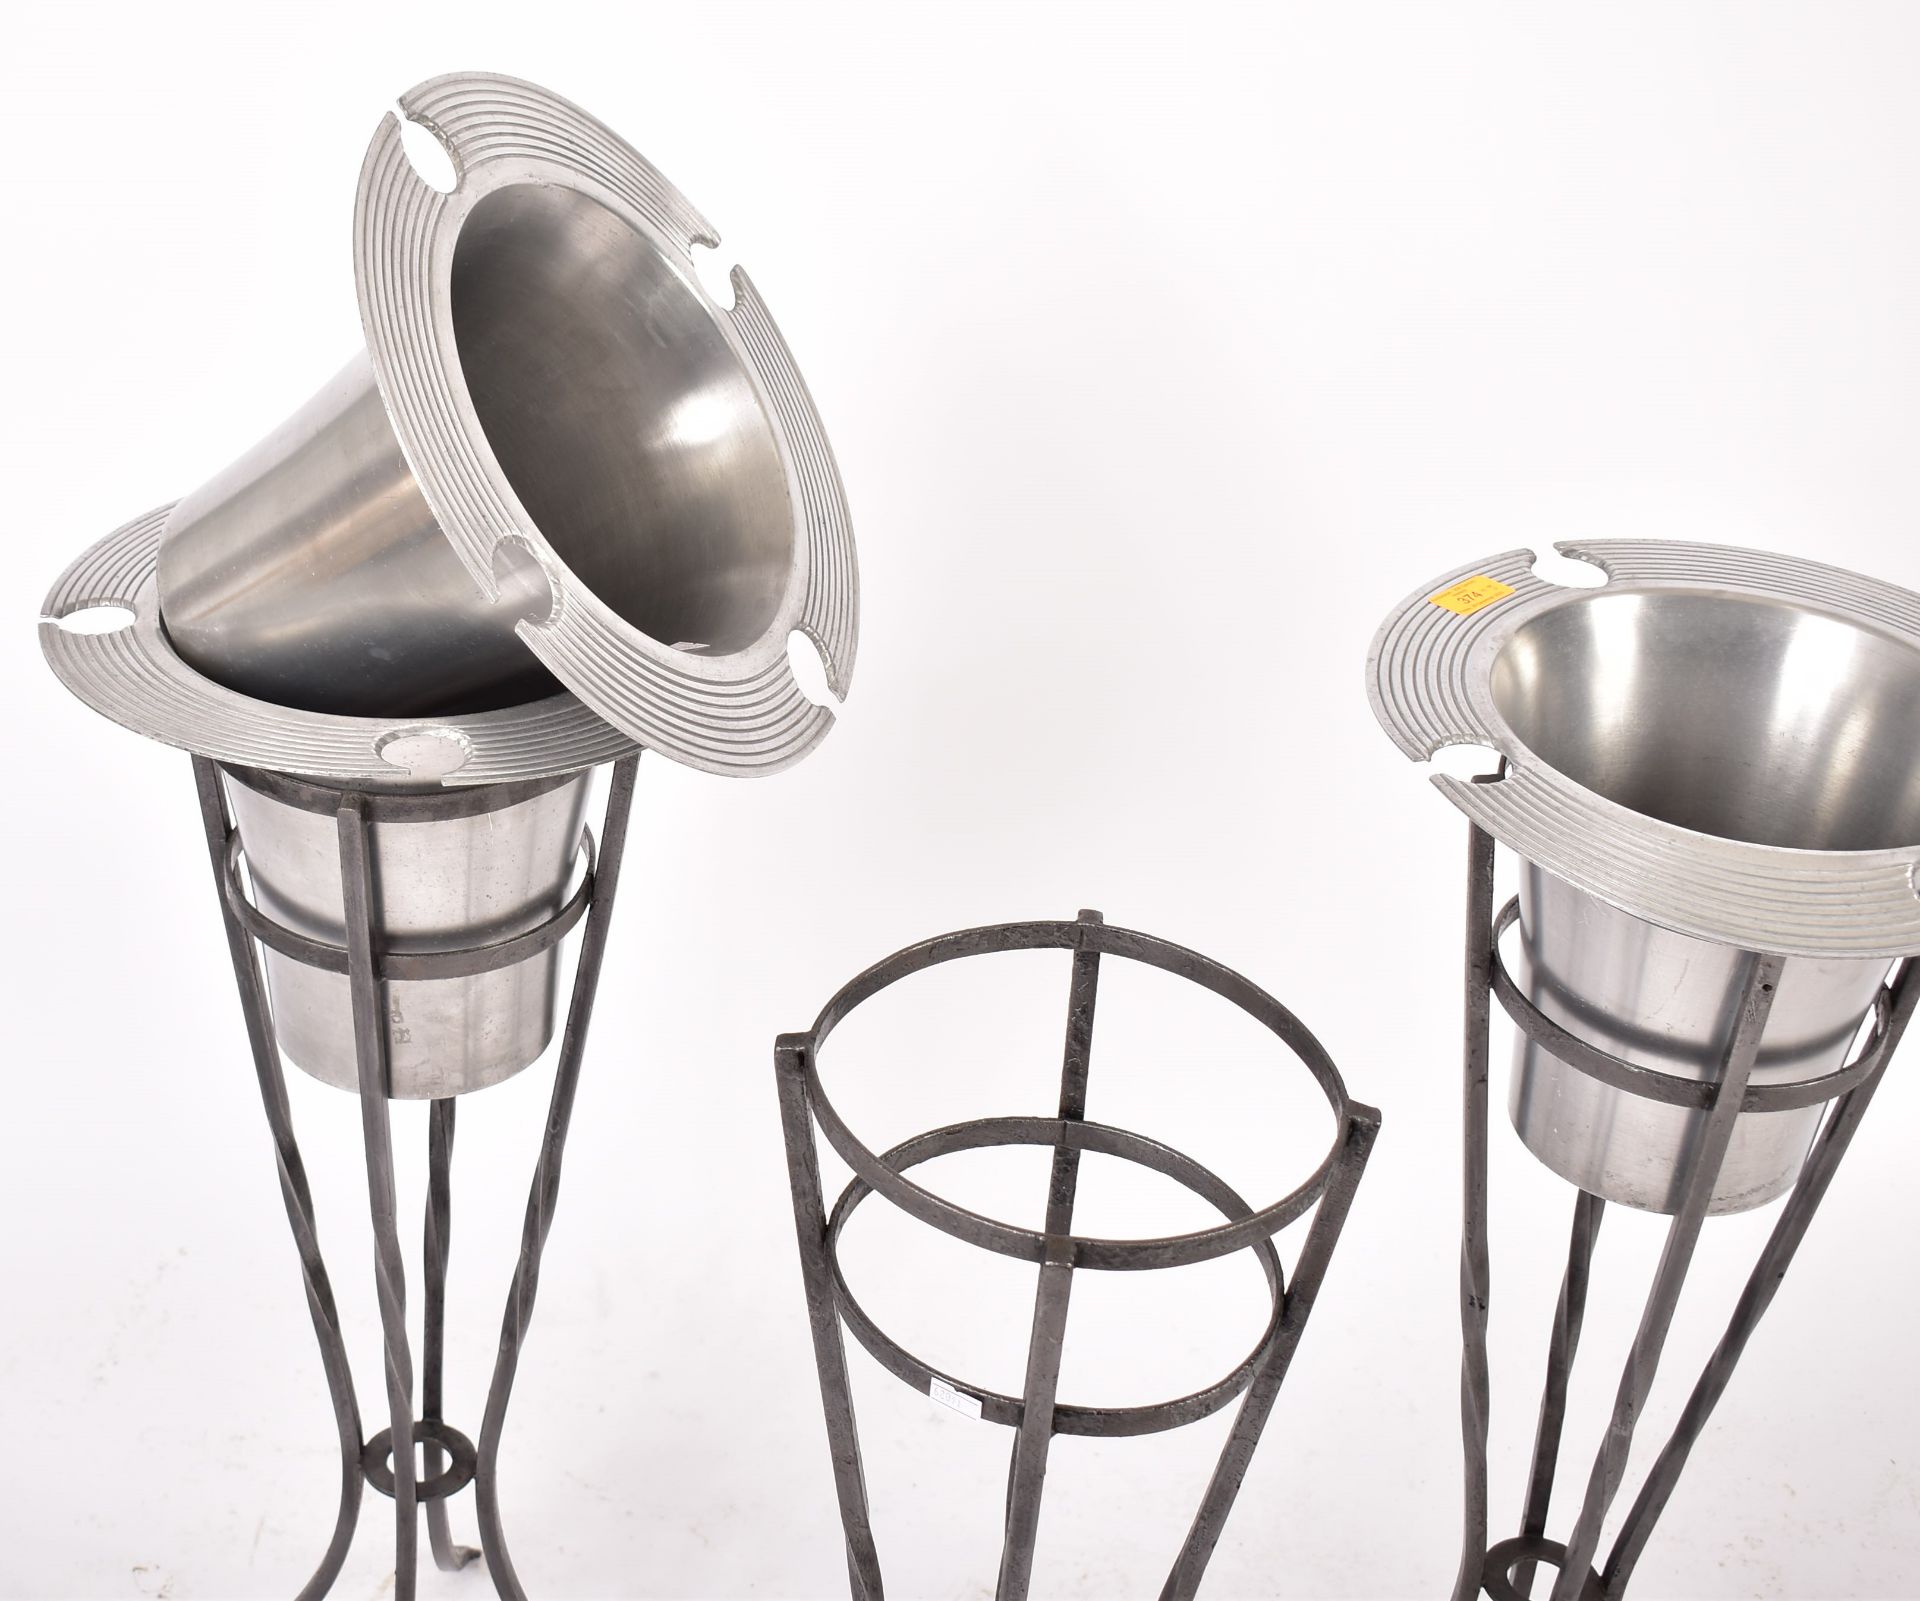 THREE CHROME & CAST IRON CHAMPAGNE BUCKETS & STANDS - Image 4 of 5